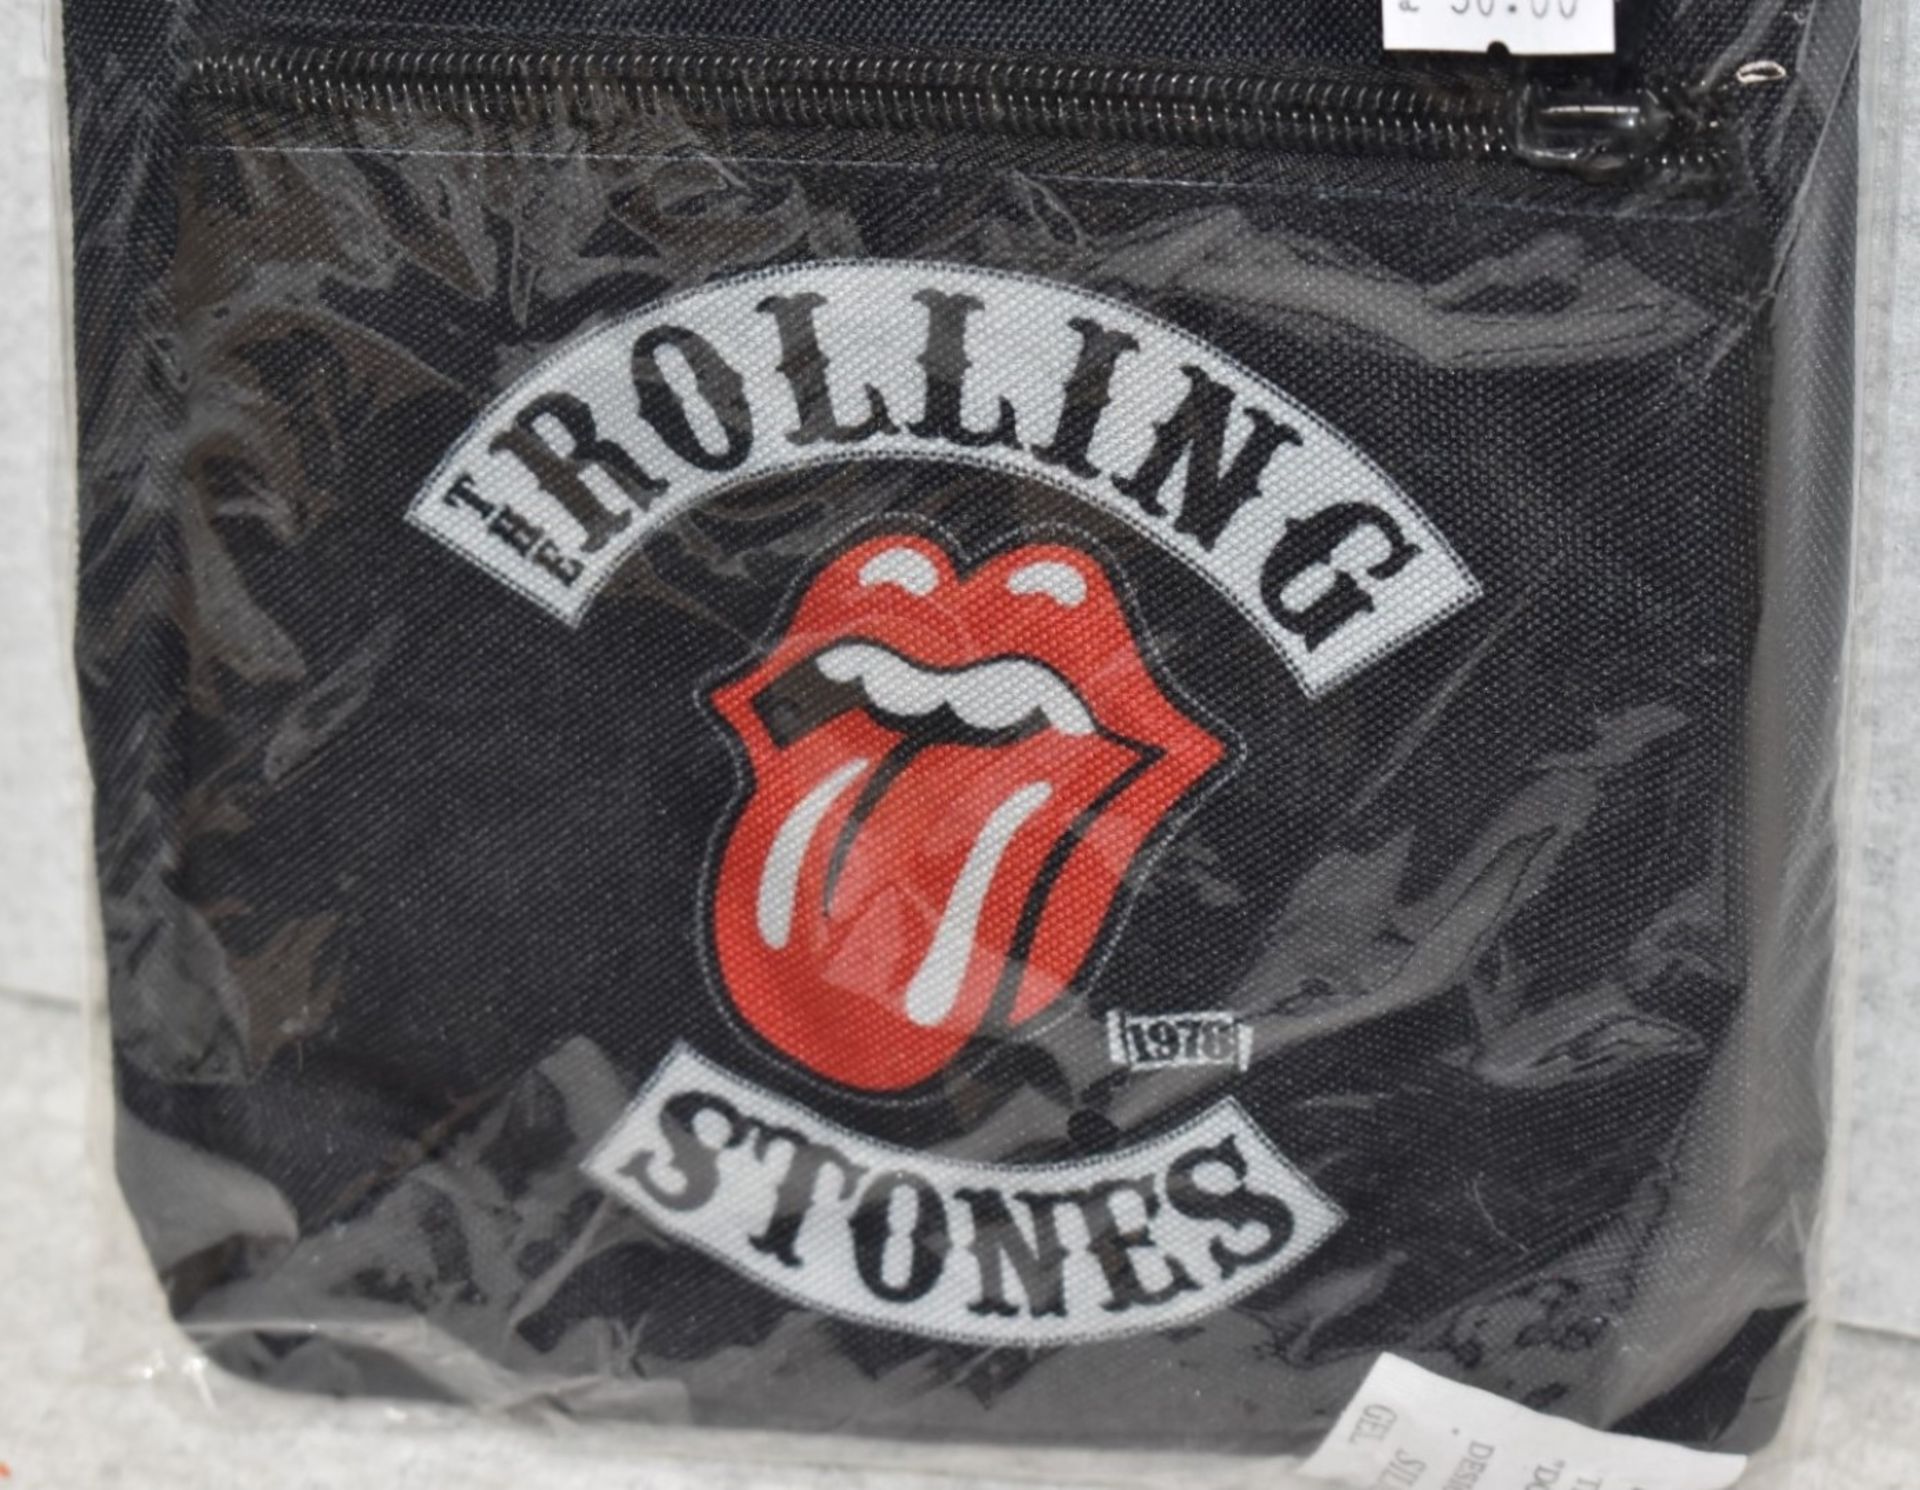 1 x Rolling Stones Cross Body Festival Bag by Rock Sax - Iconic Tongue and Lips Logo - Officially - Image 5 of 6